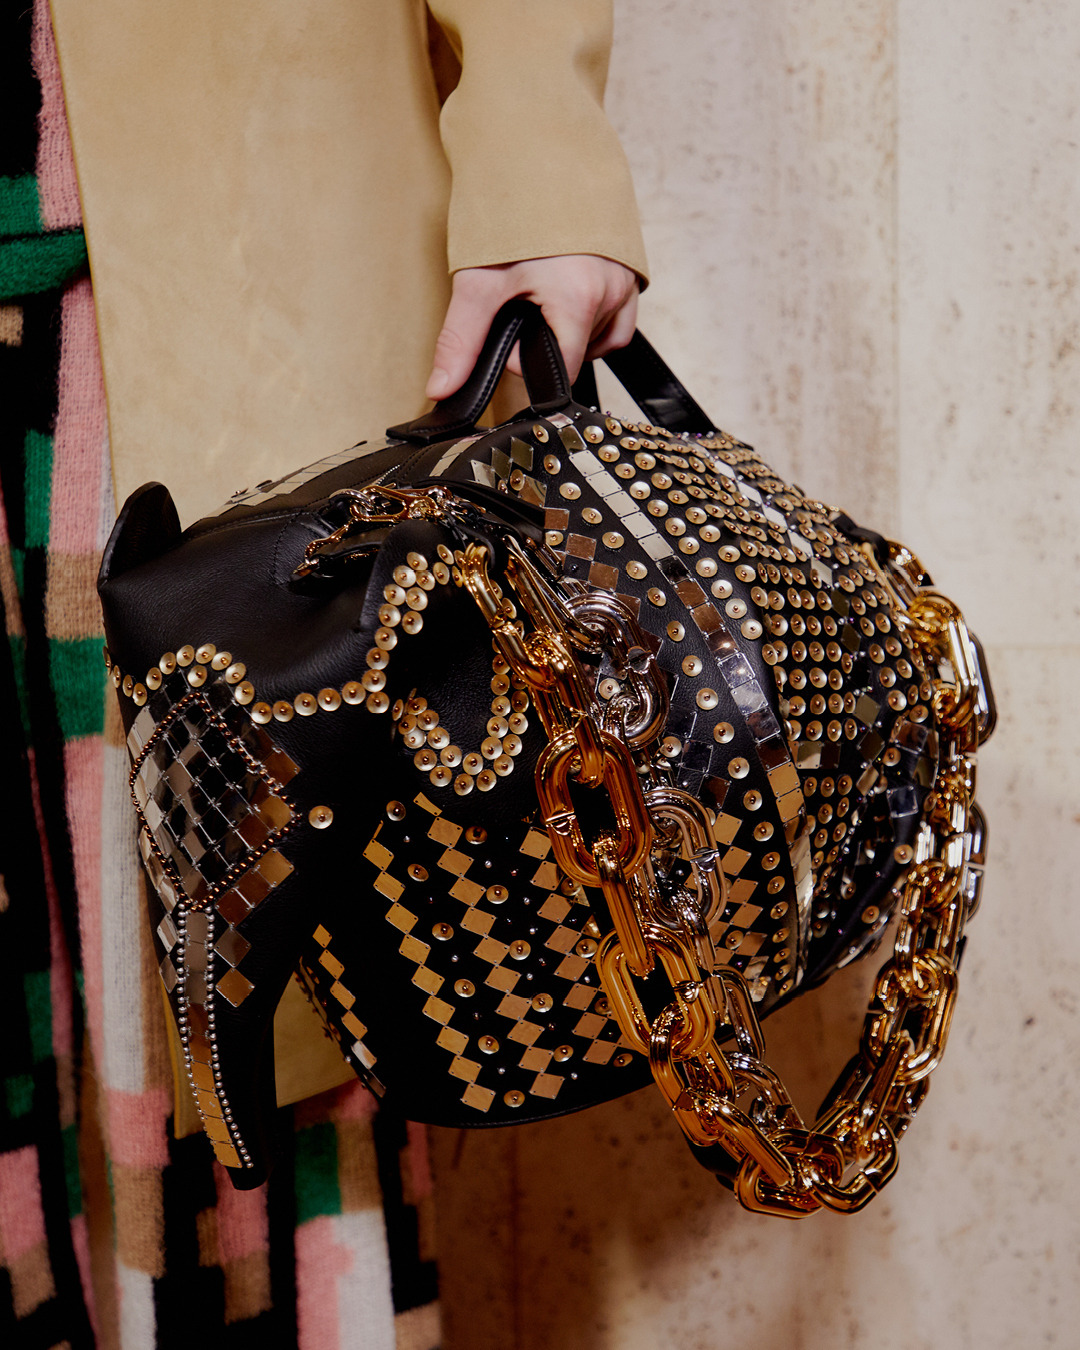 LOEWE on X: The studded Elephant bag as seen backstage at the